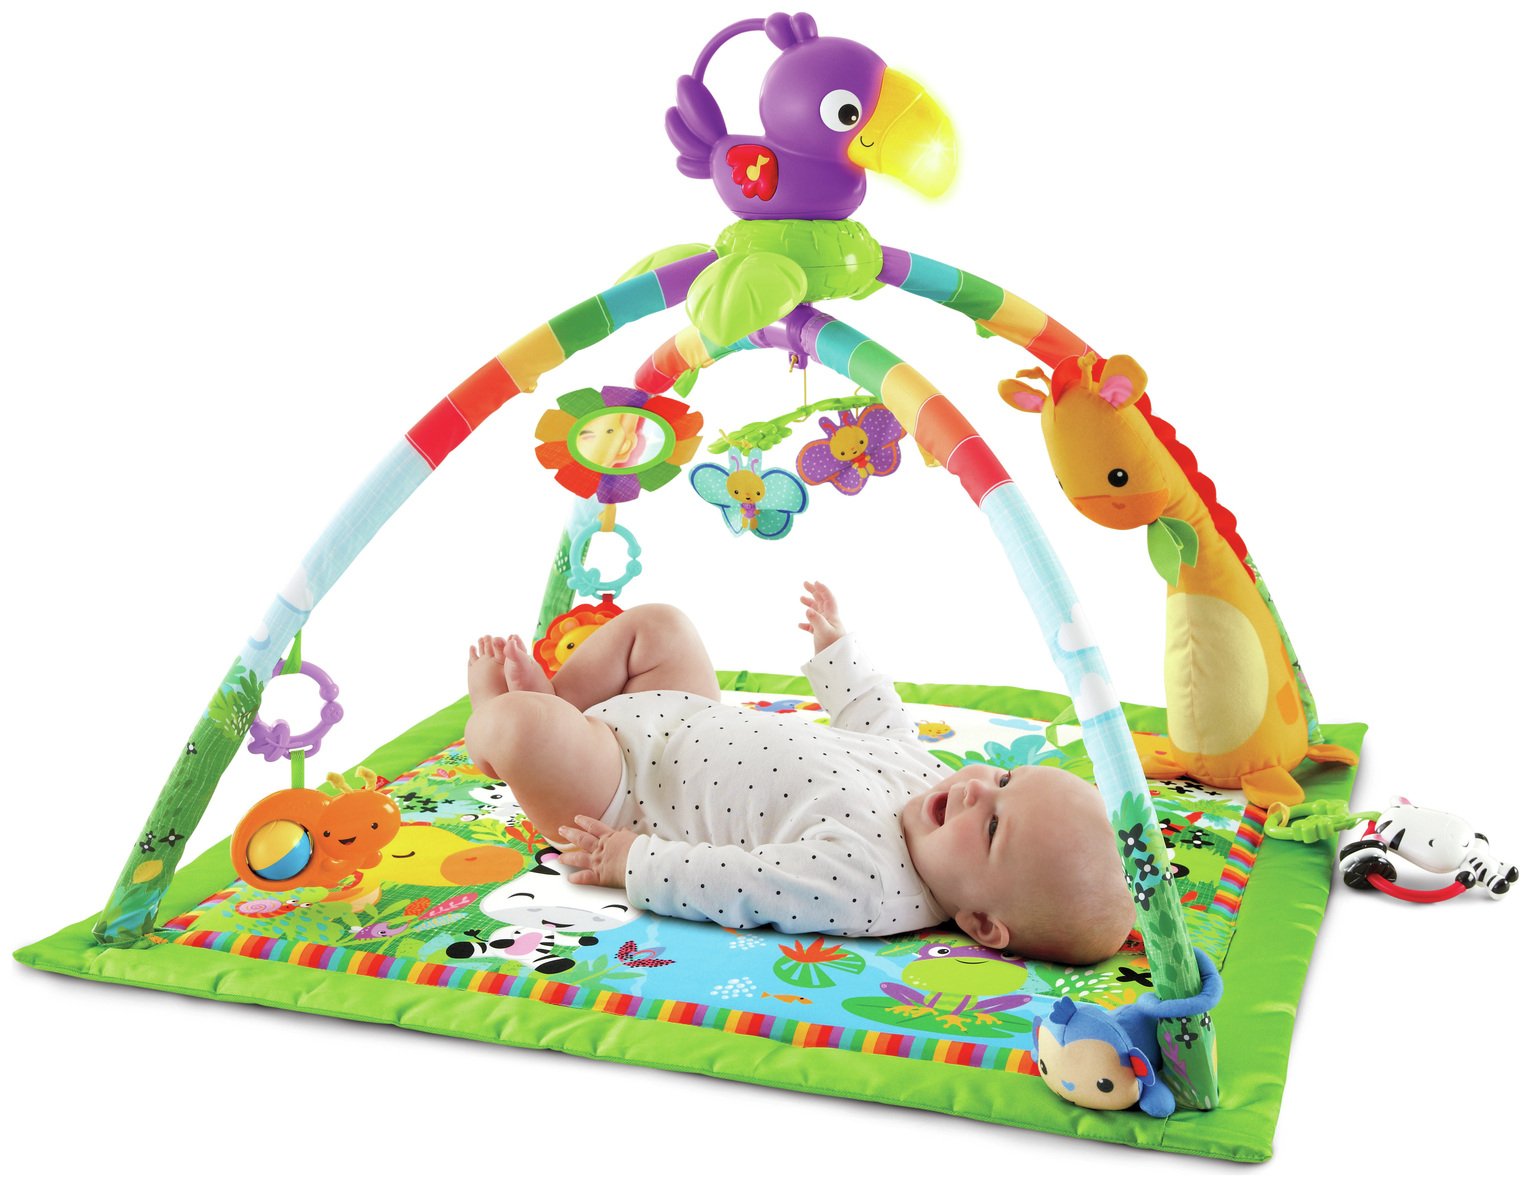 Fisher-Price Rainforest Music & Lights Deluxe Gym Review